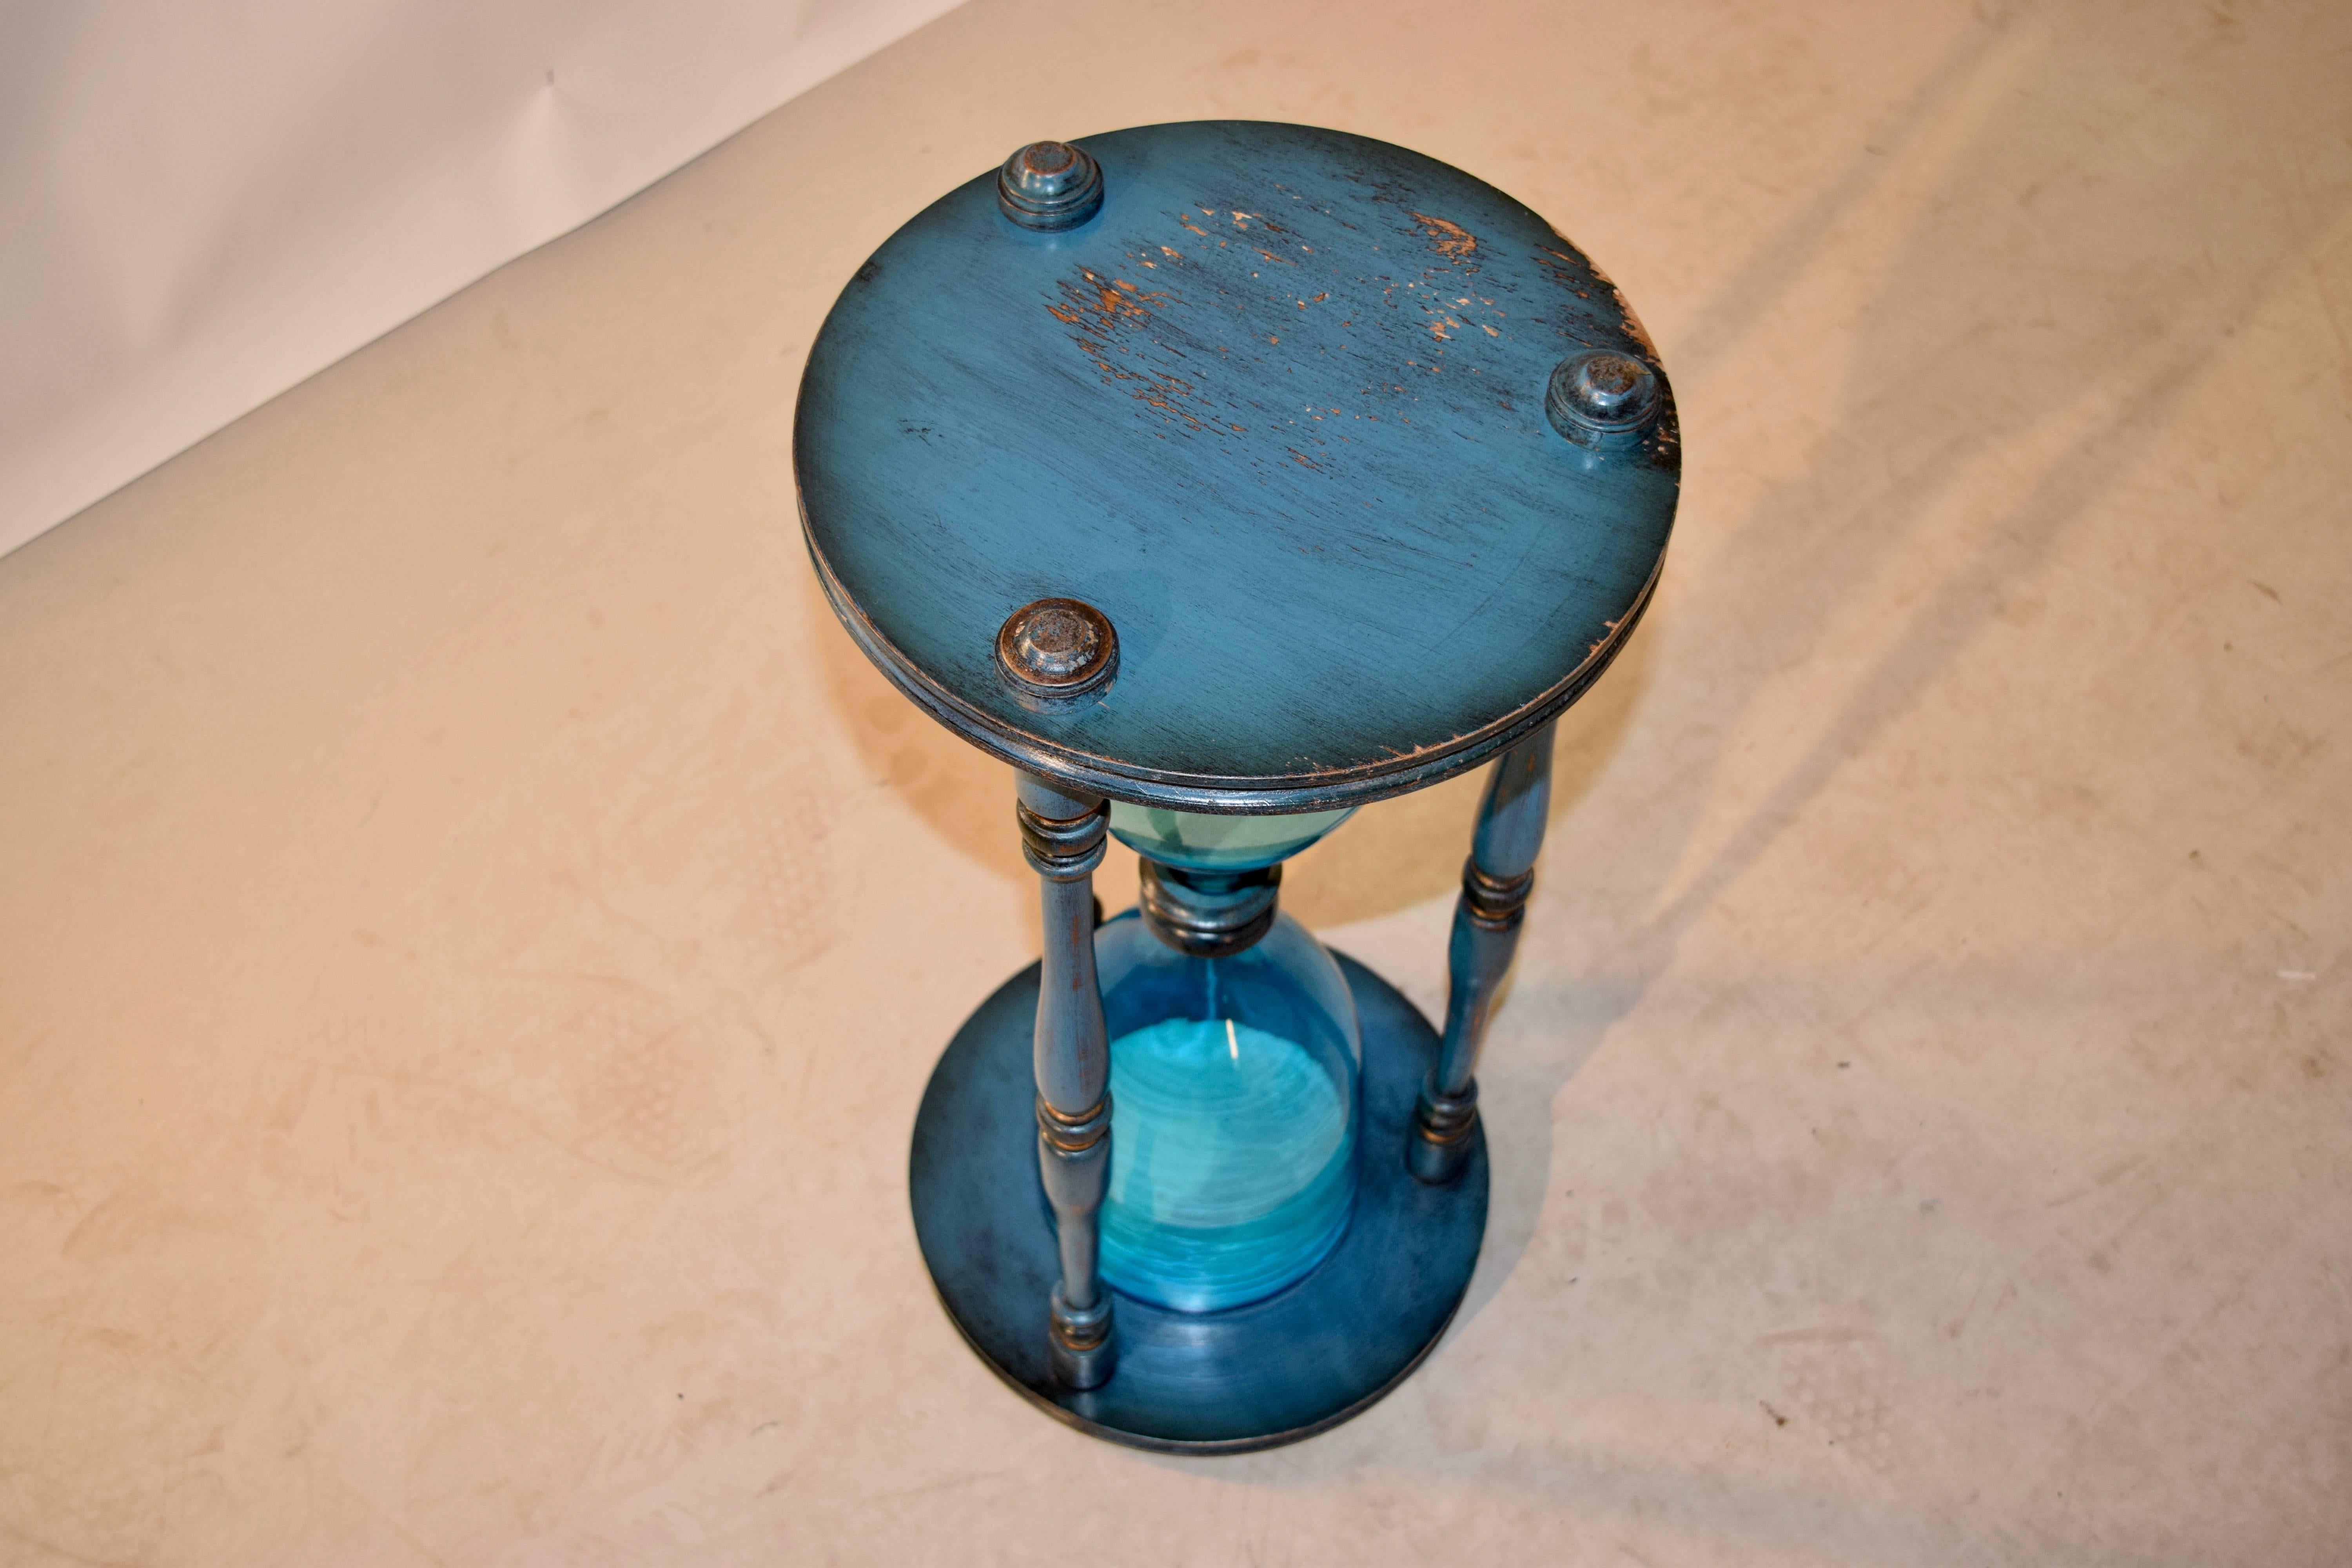 Large hourglass with handblown glass and wonderfully turned supports and bases, circa 1950s. The blue paint is original to the piece.